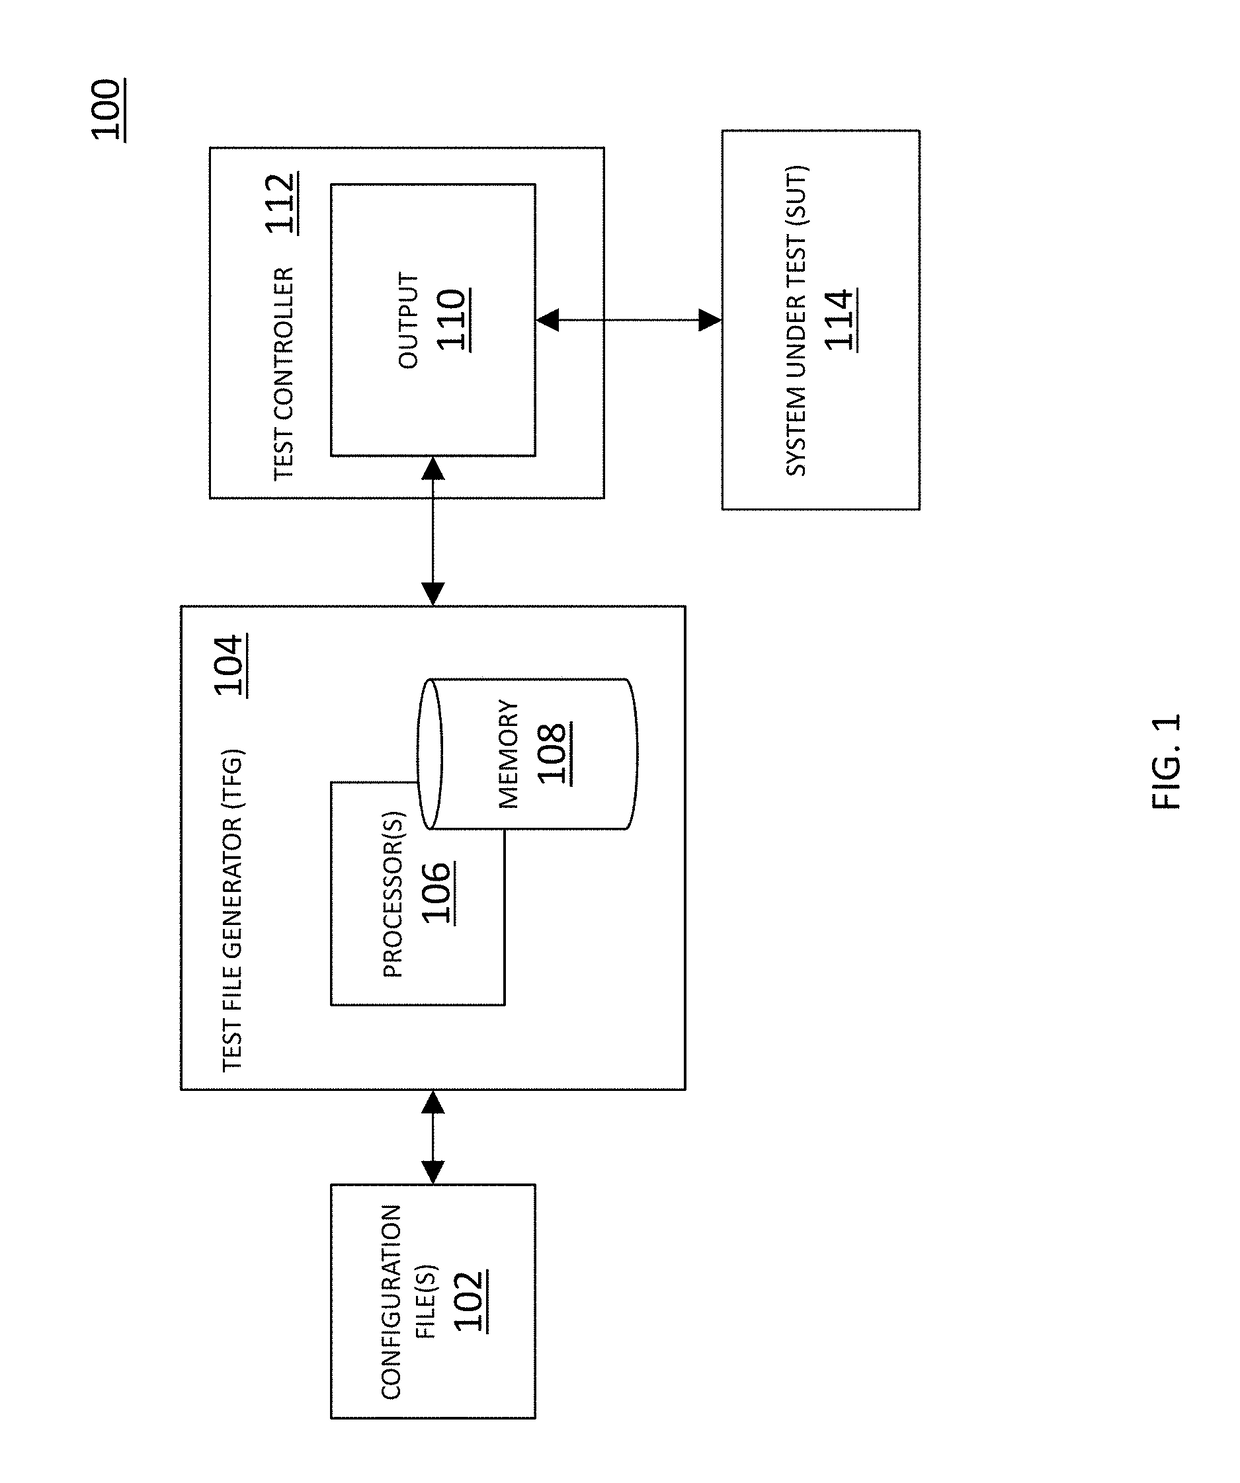 Methods, systems, and computer readable media for automated generation of test files and testing network equipment using same